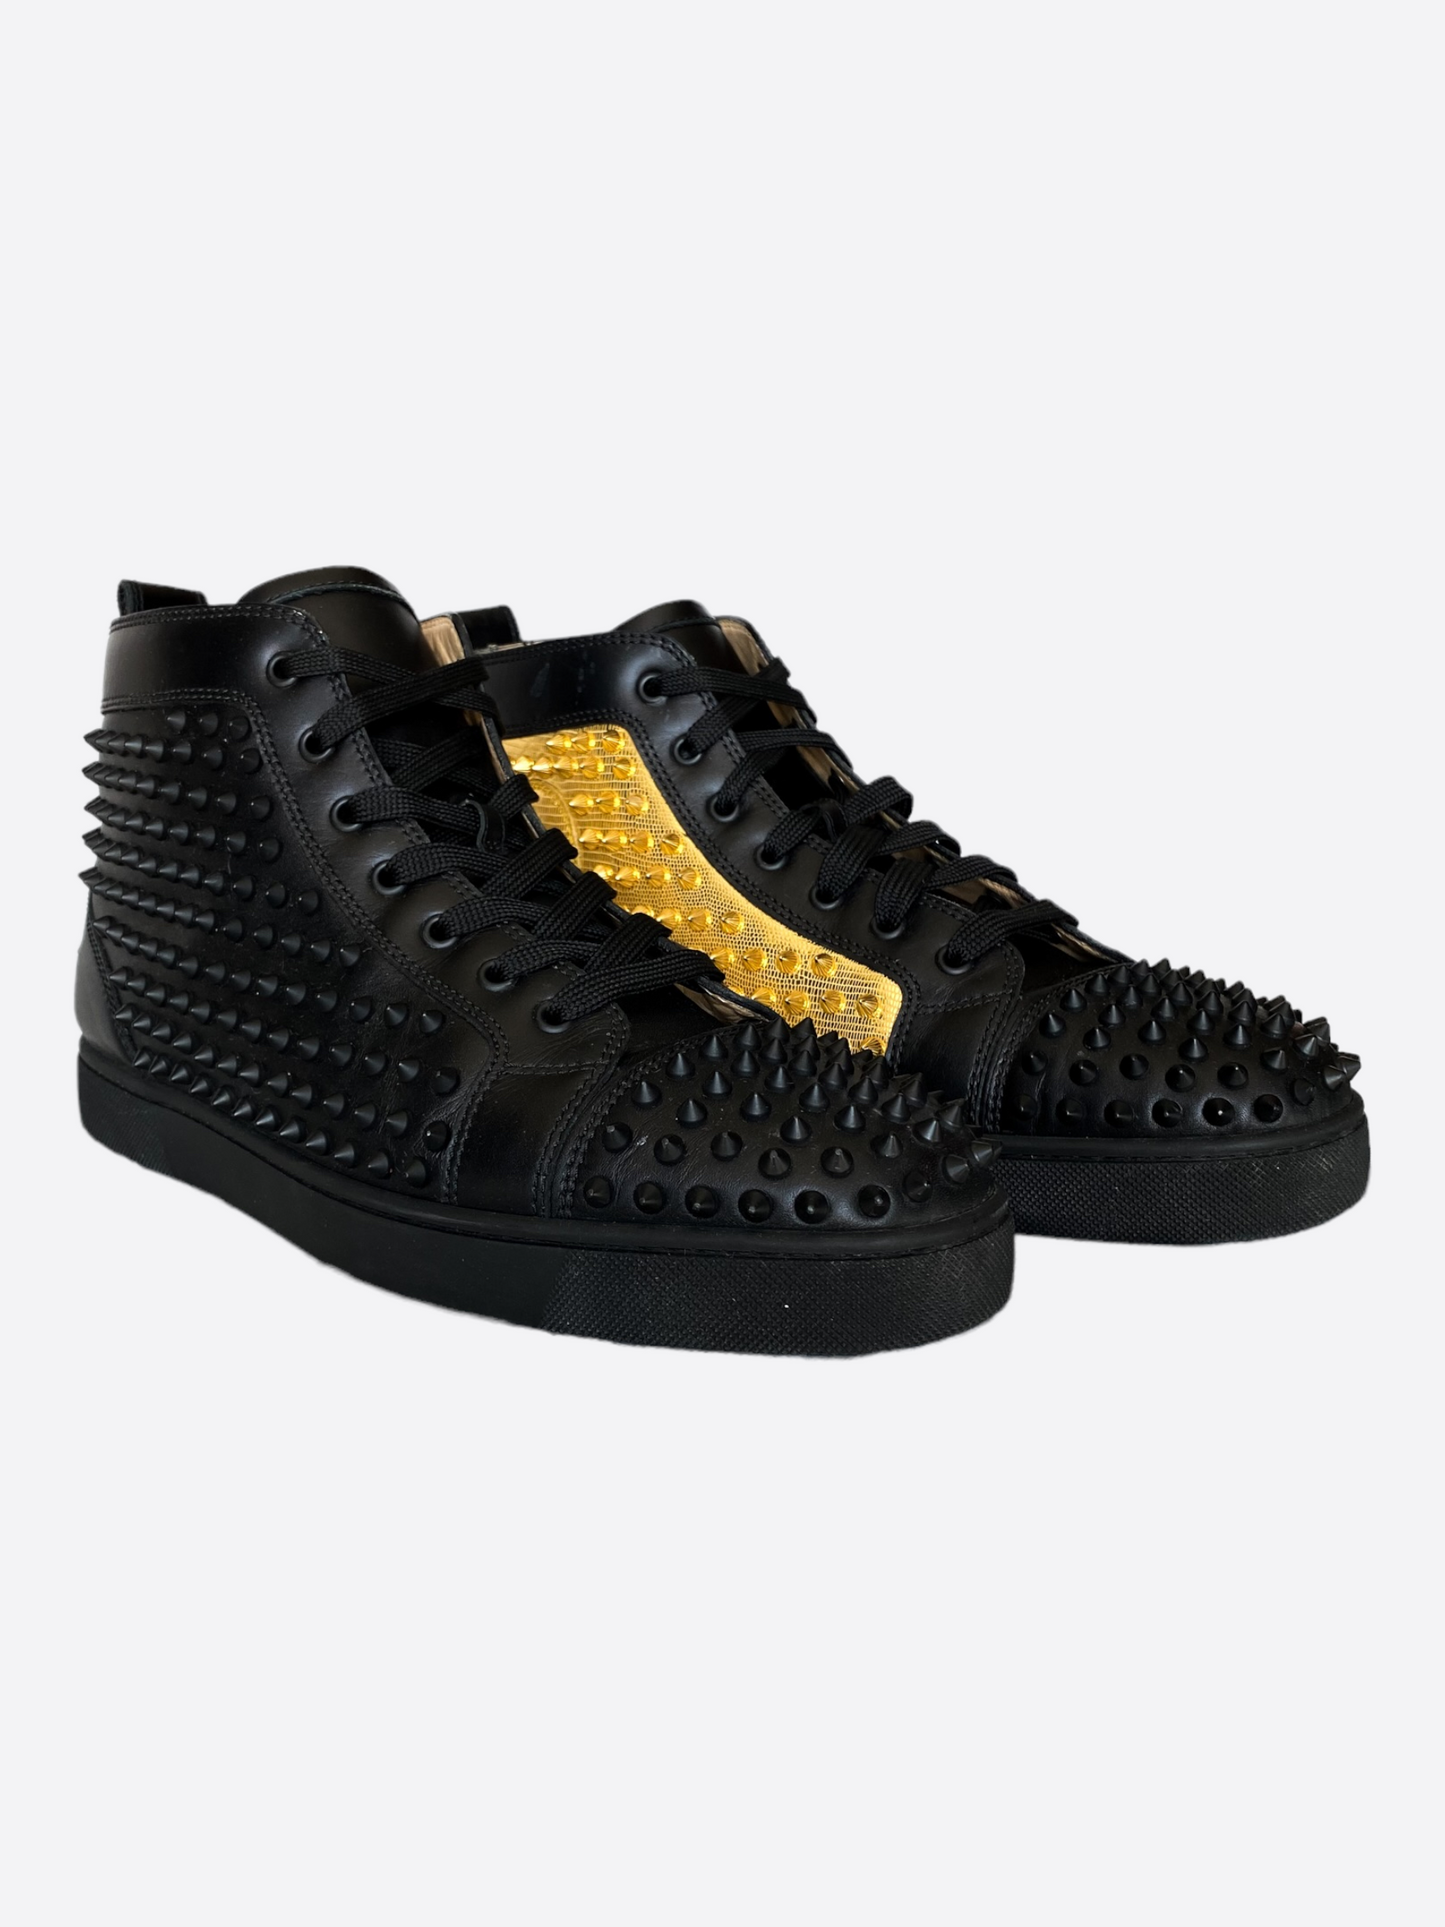 Christian Louboutin Black & Gold High Top Spiked Sneakers